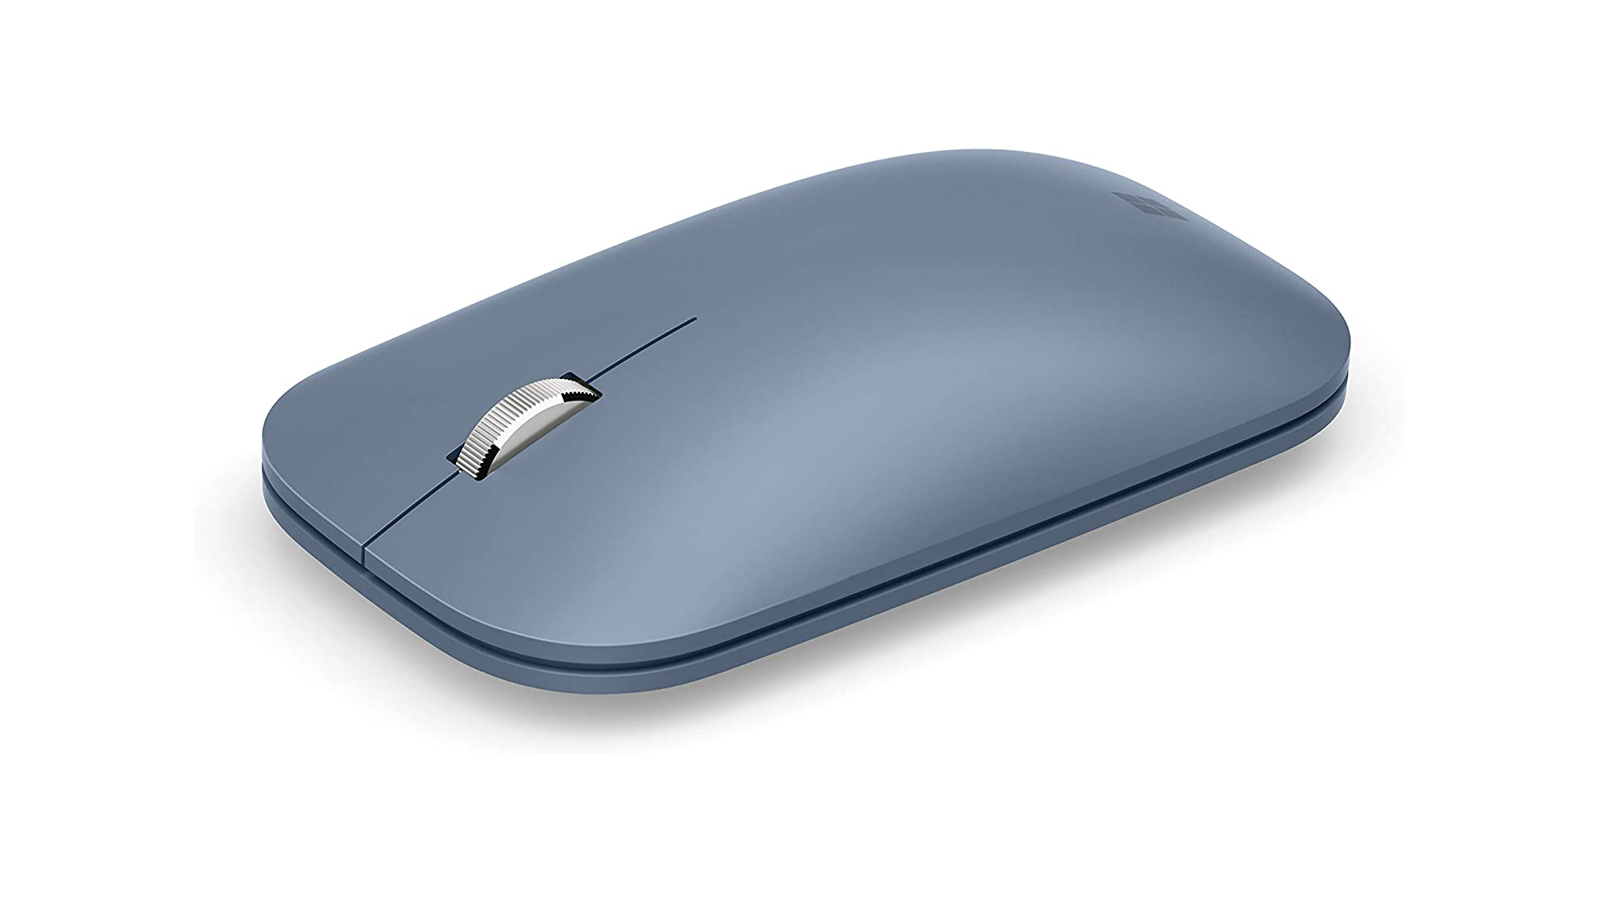 Logitech's new Signature M650 mouse delivers more for less - CNET